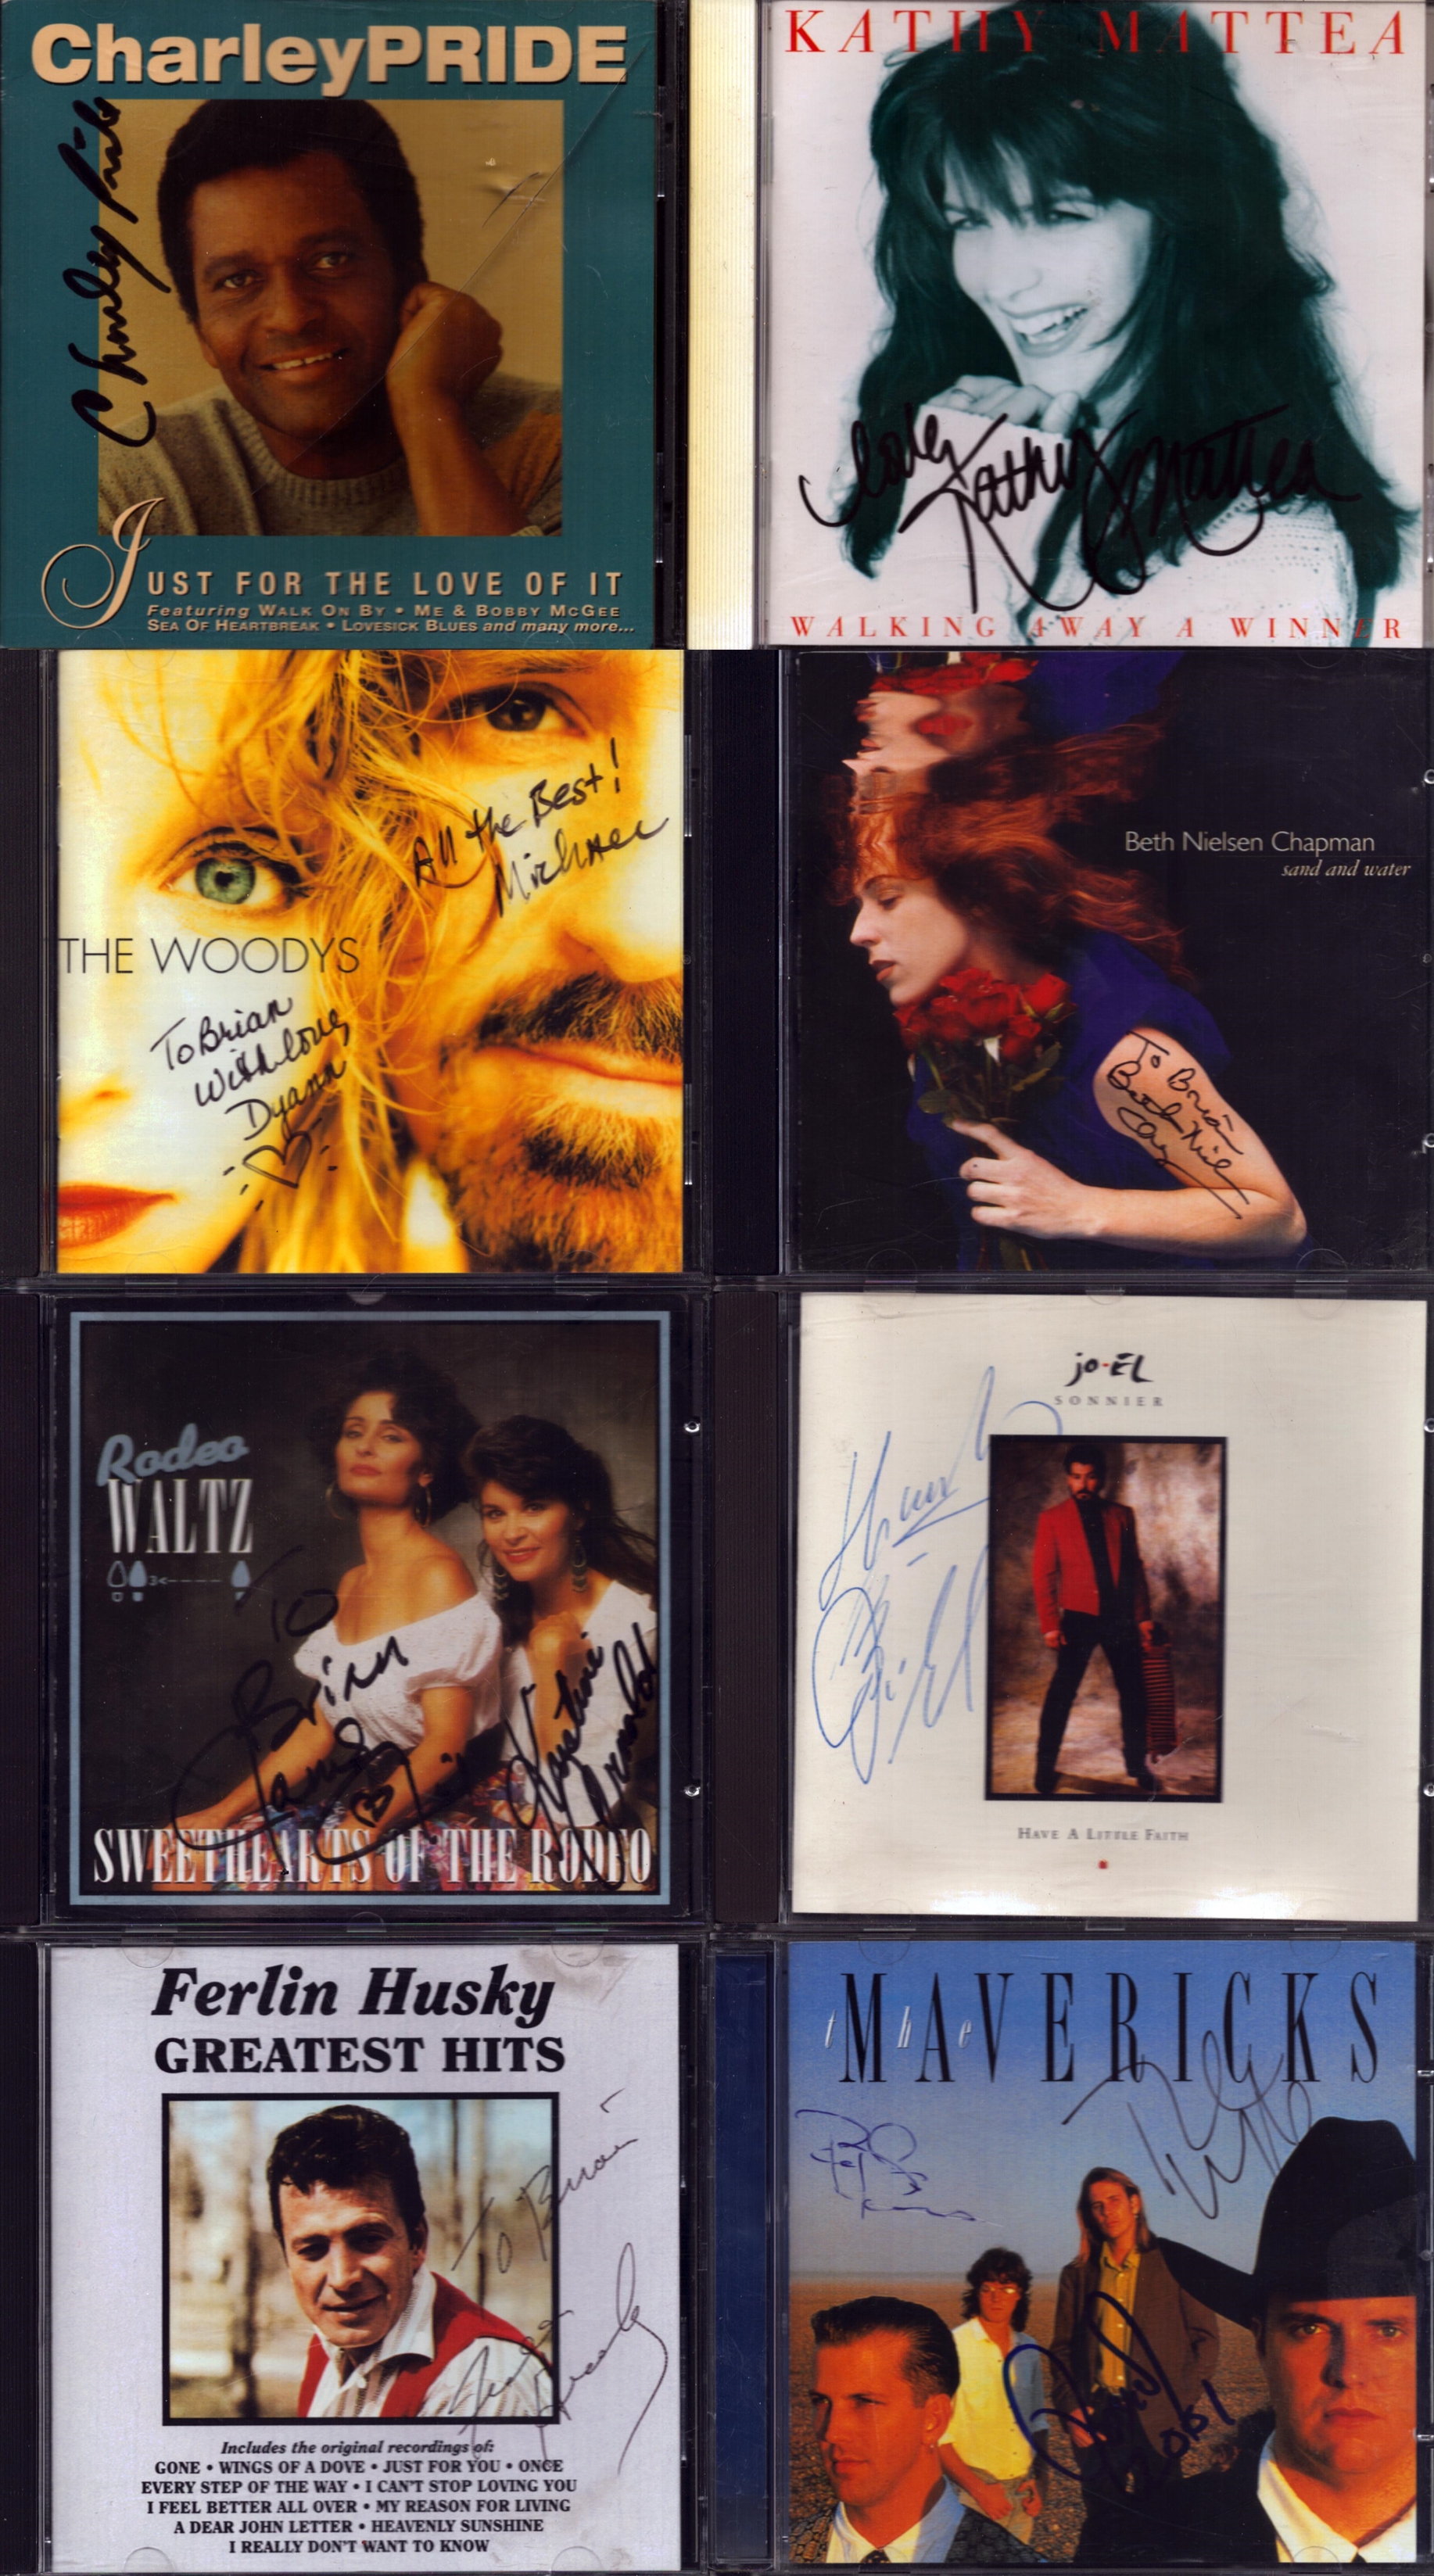 Music collection of 8 signed CDs including names of The Woods, Ferlin Husky, Jo-El Sonnier and more.